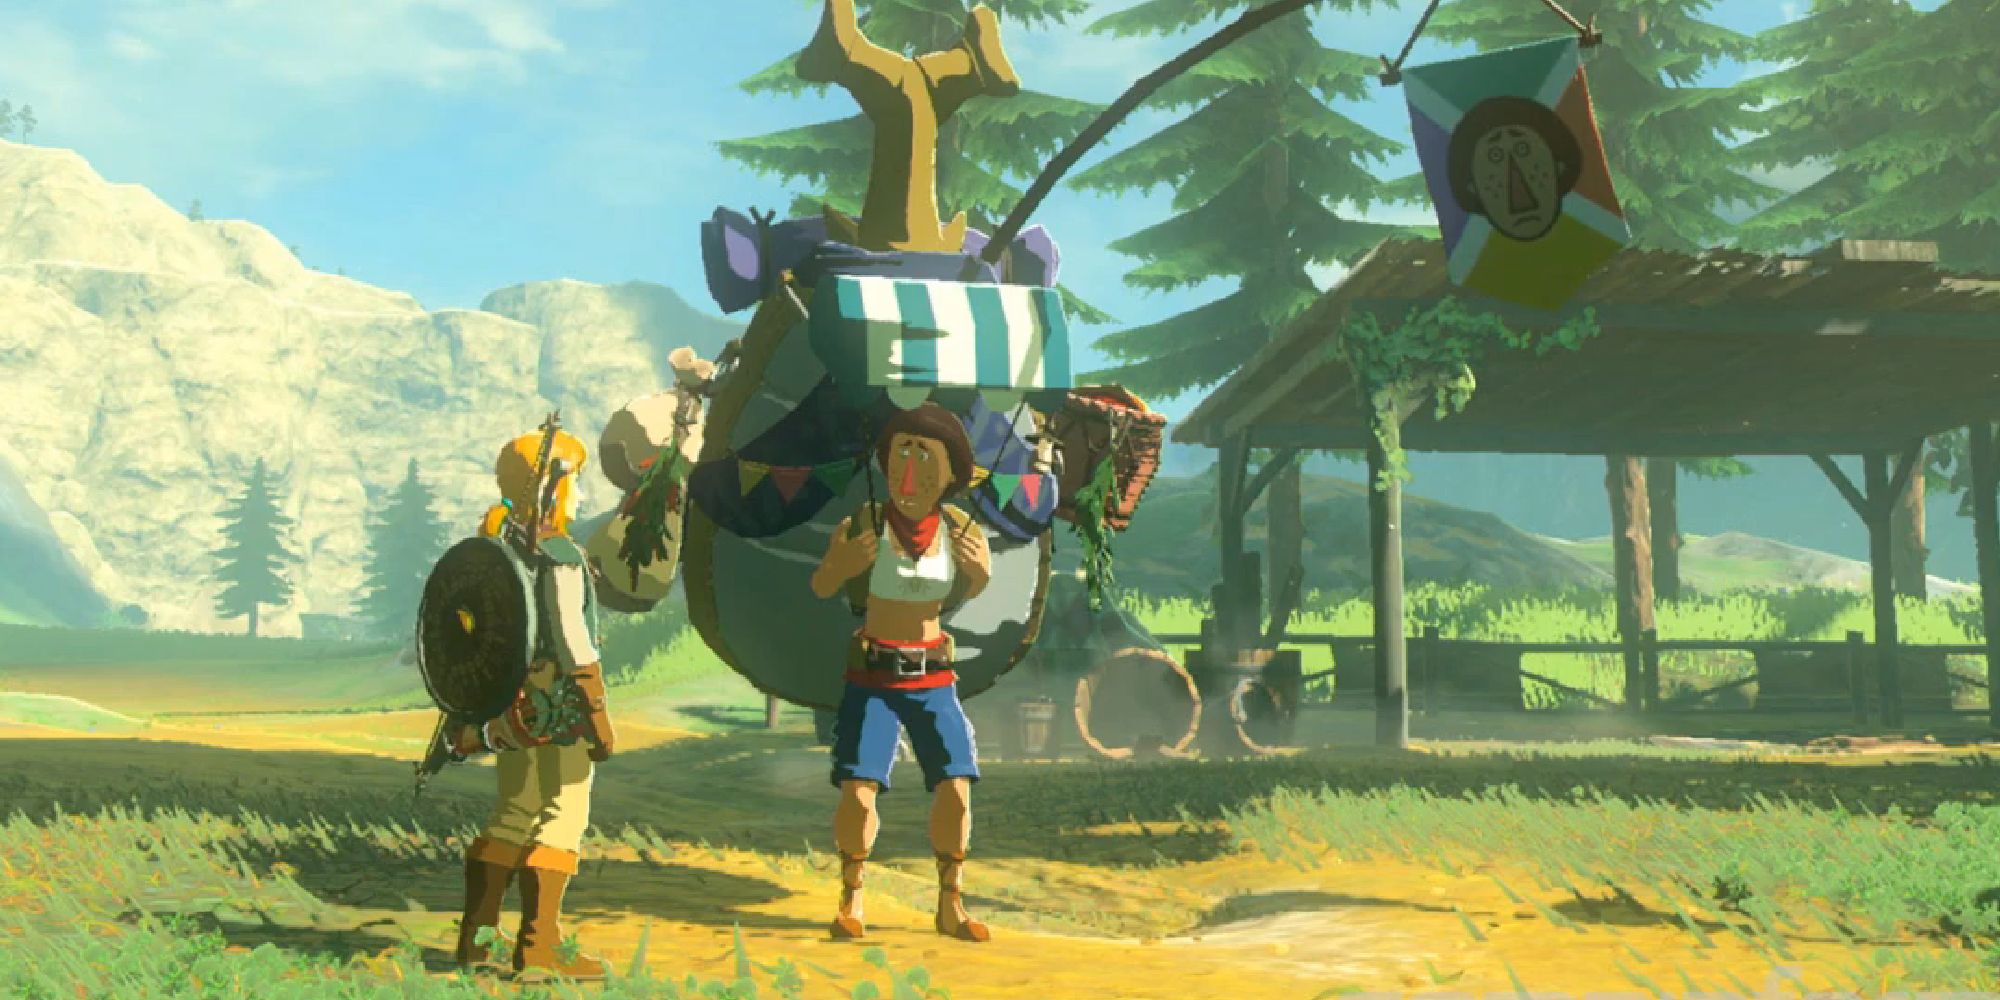 A screenshot showing Link talking to Beedle in The Legend of Zelda: Breath of the Wild